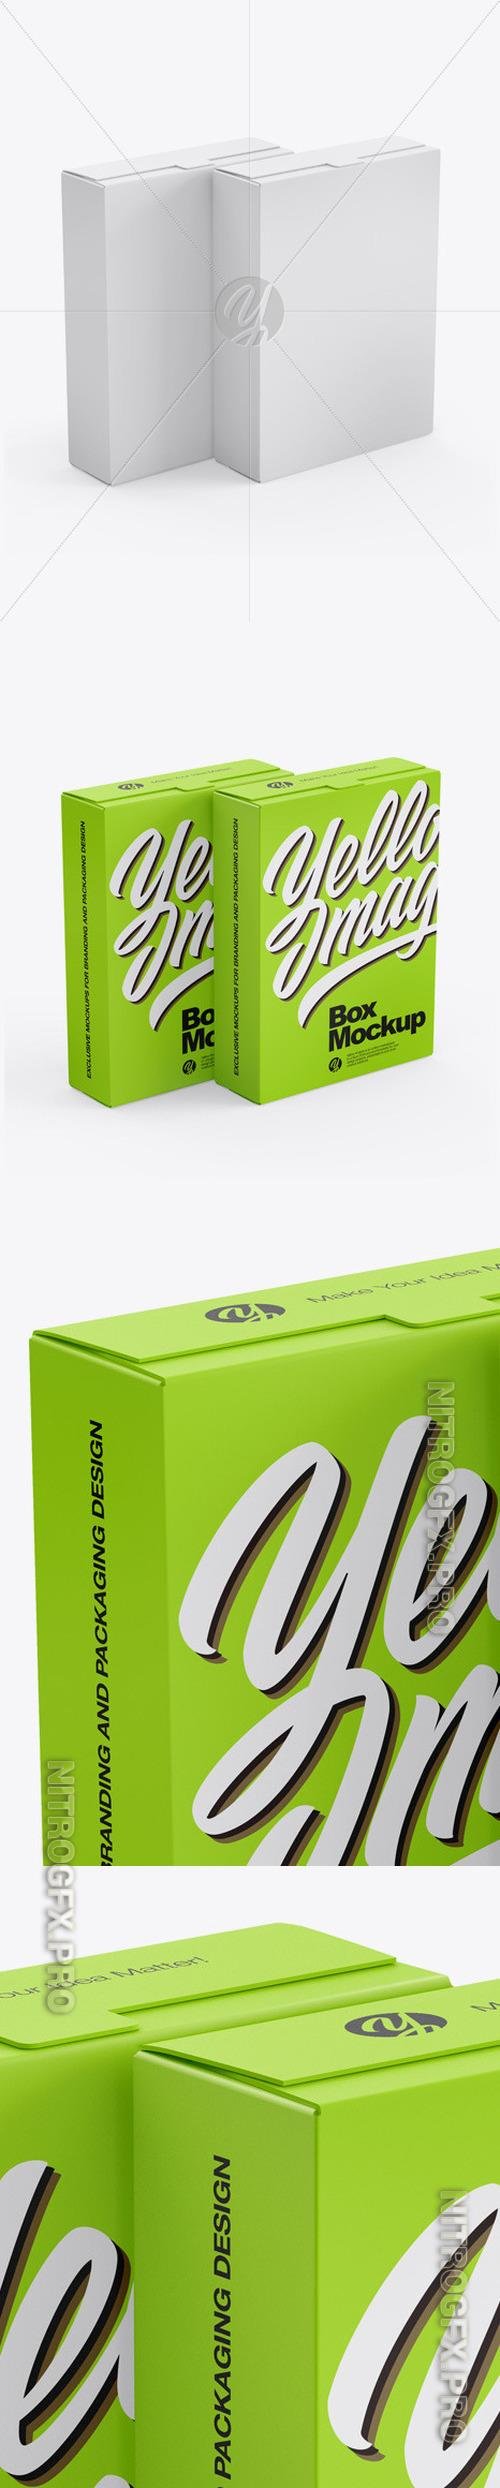 Two Paper Boxes Mockup - 48749